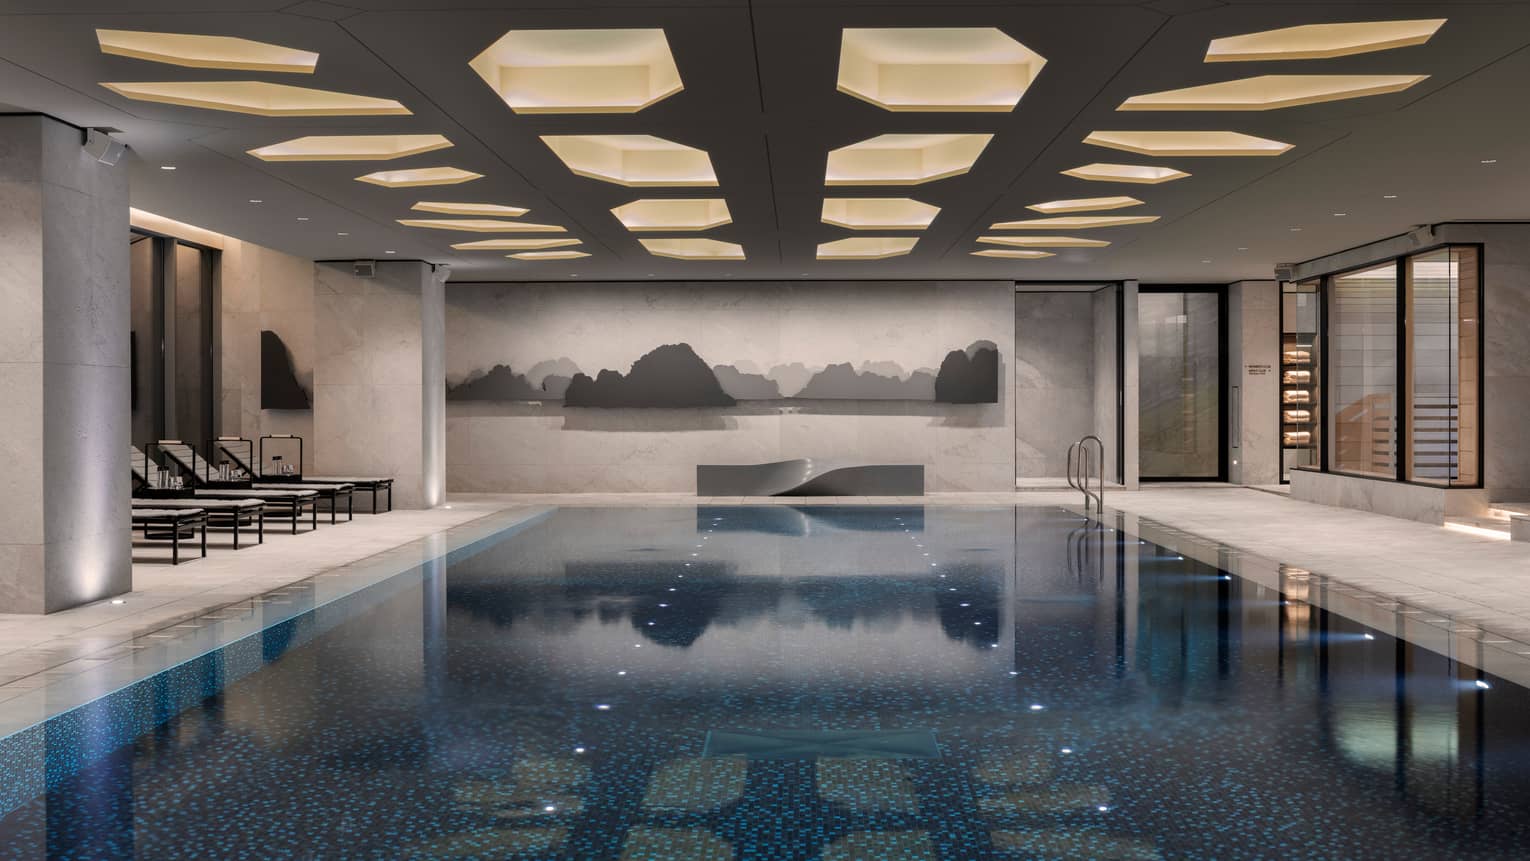 Indoor swimming pool under ceiling with recessed lights